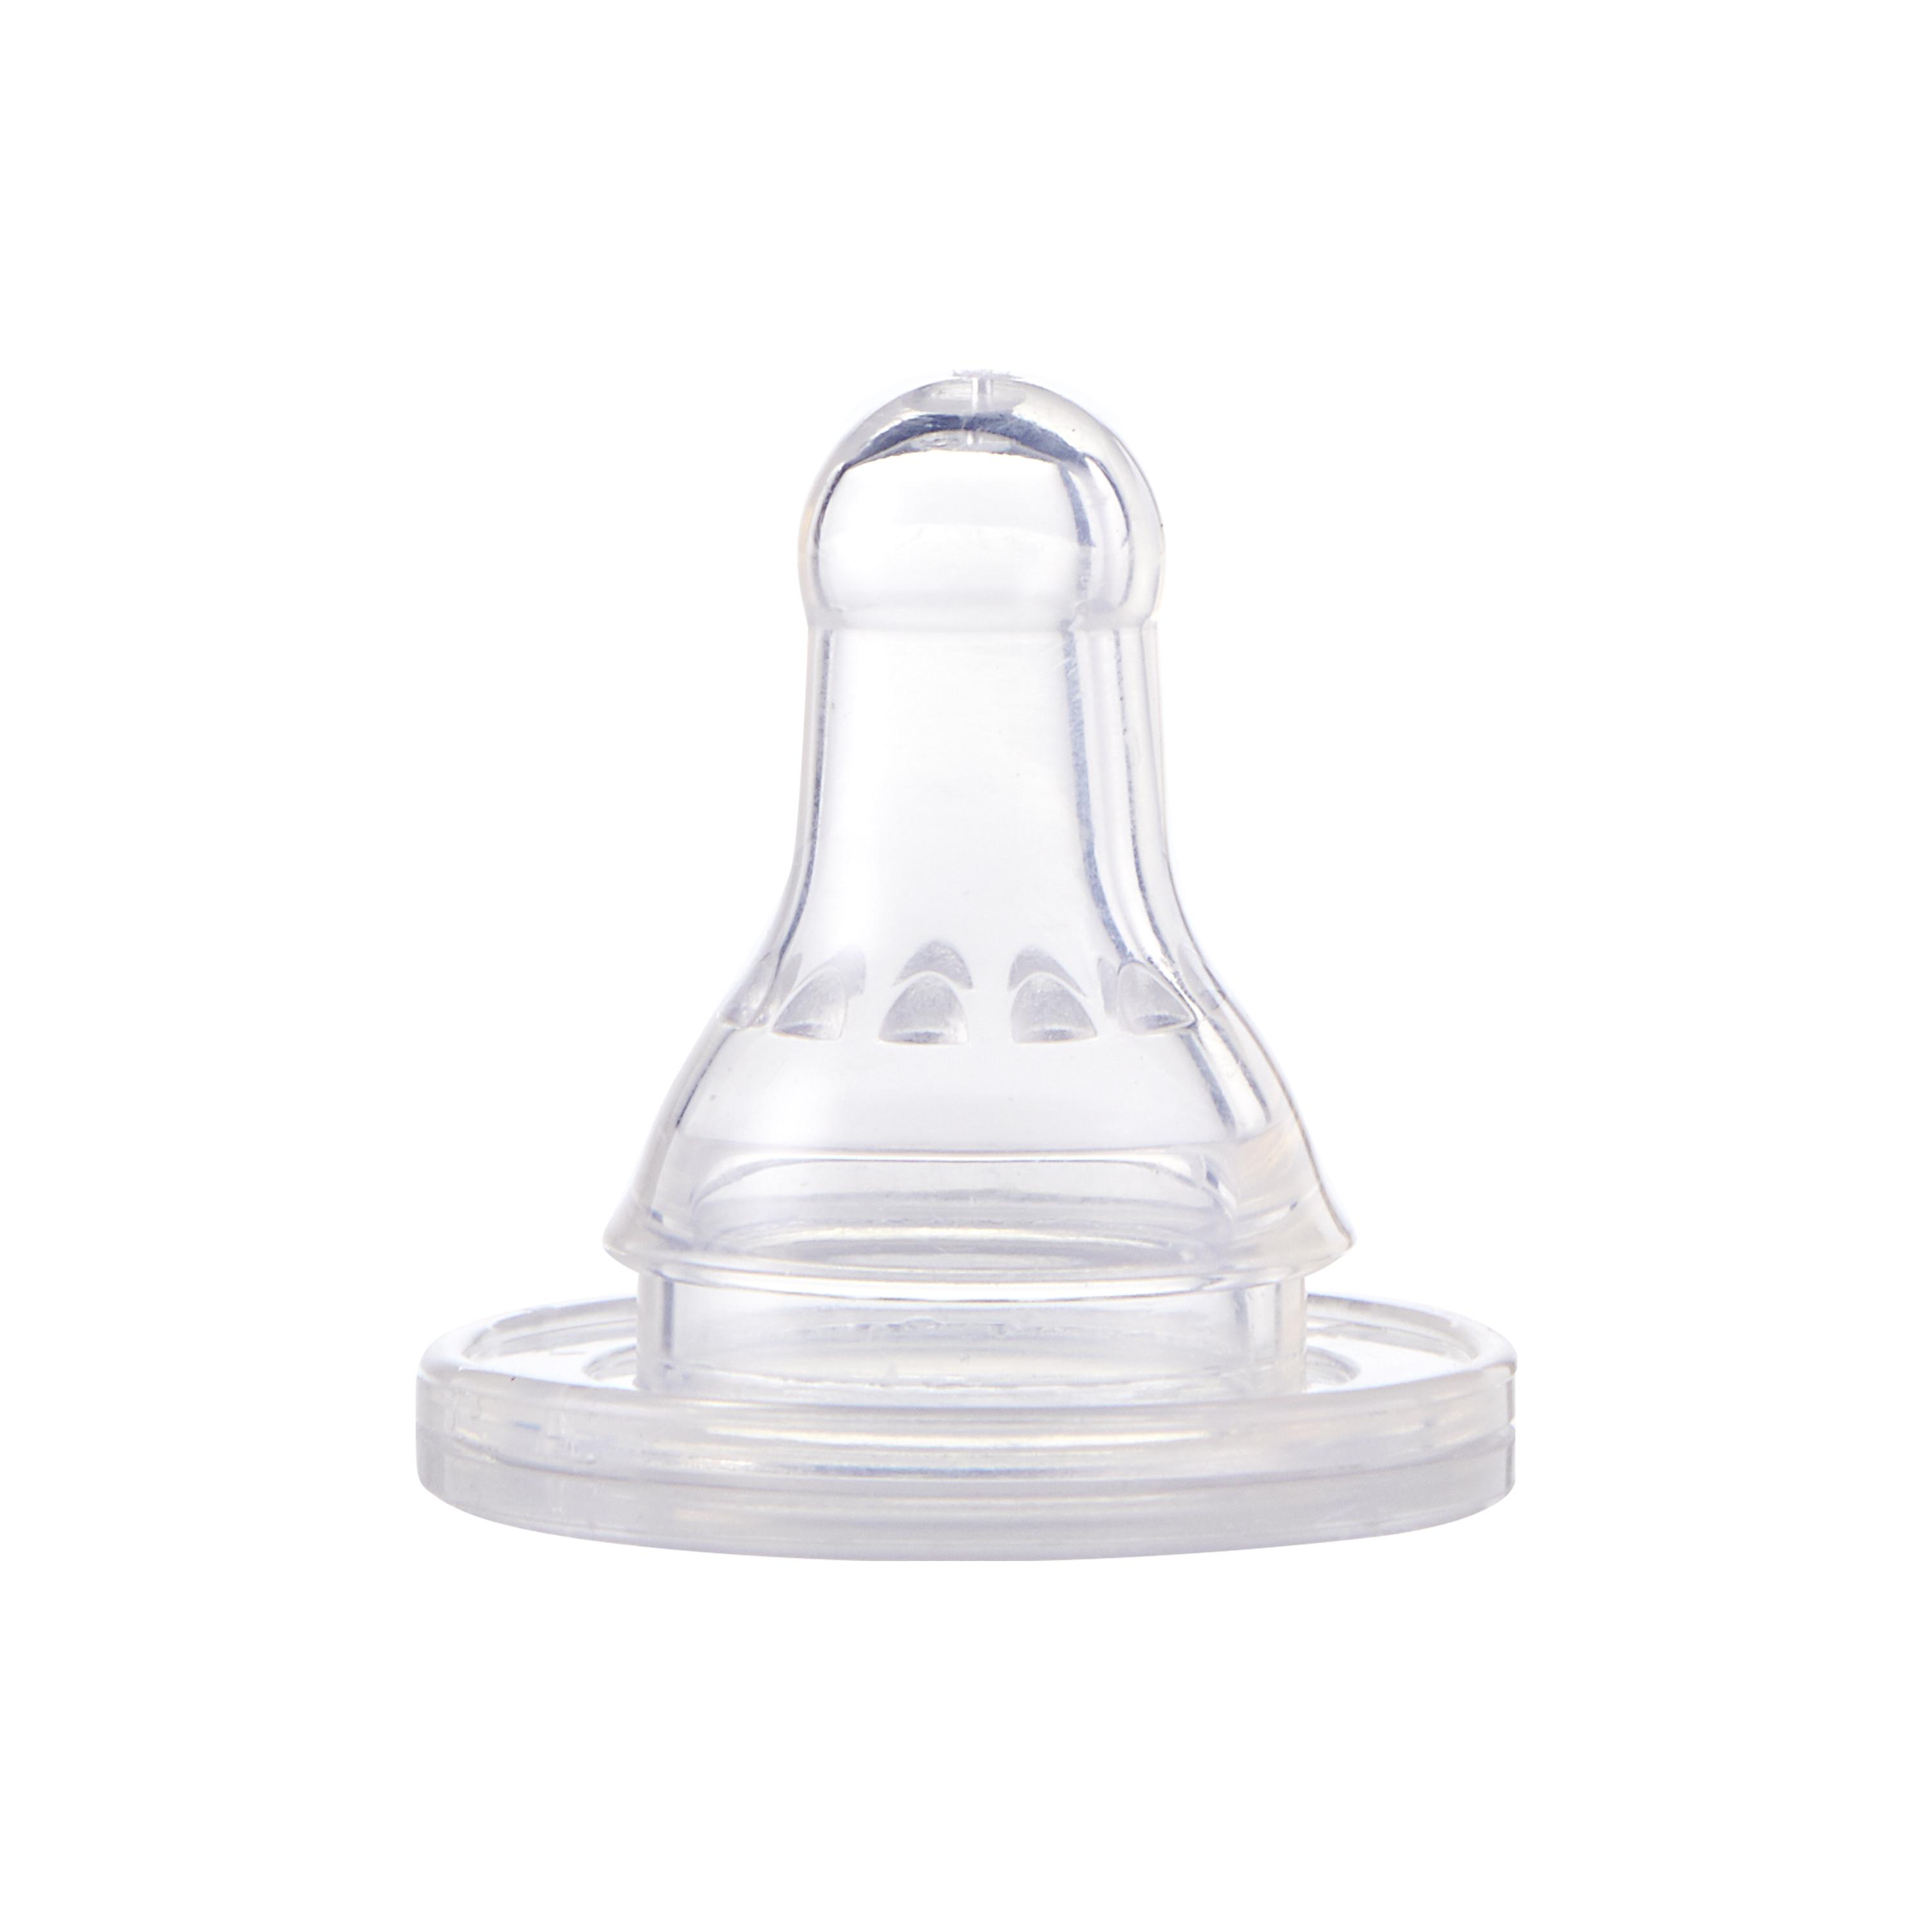 First Essentials by NUK™ Replacement Bottle Nipples Product Image 1 of 2